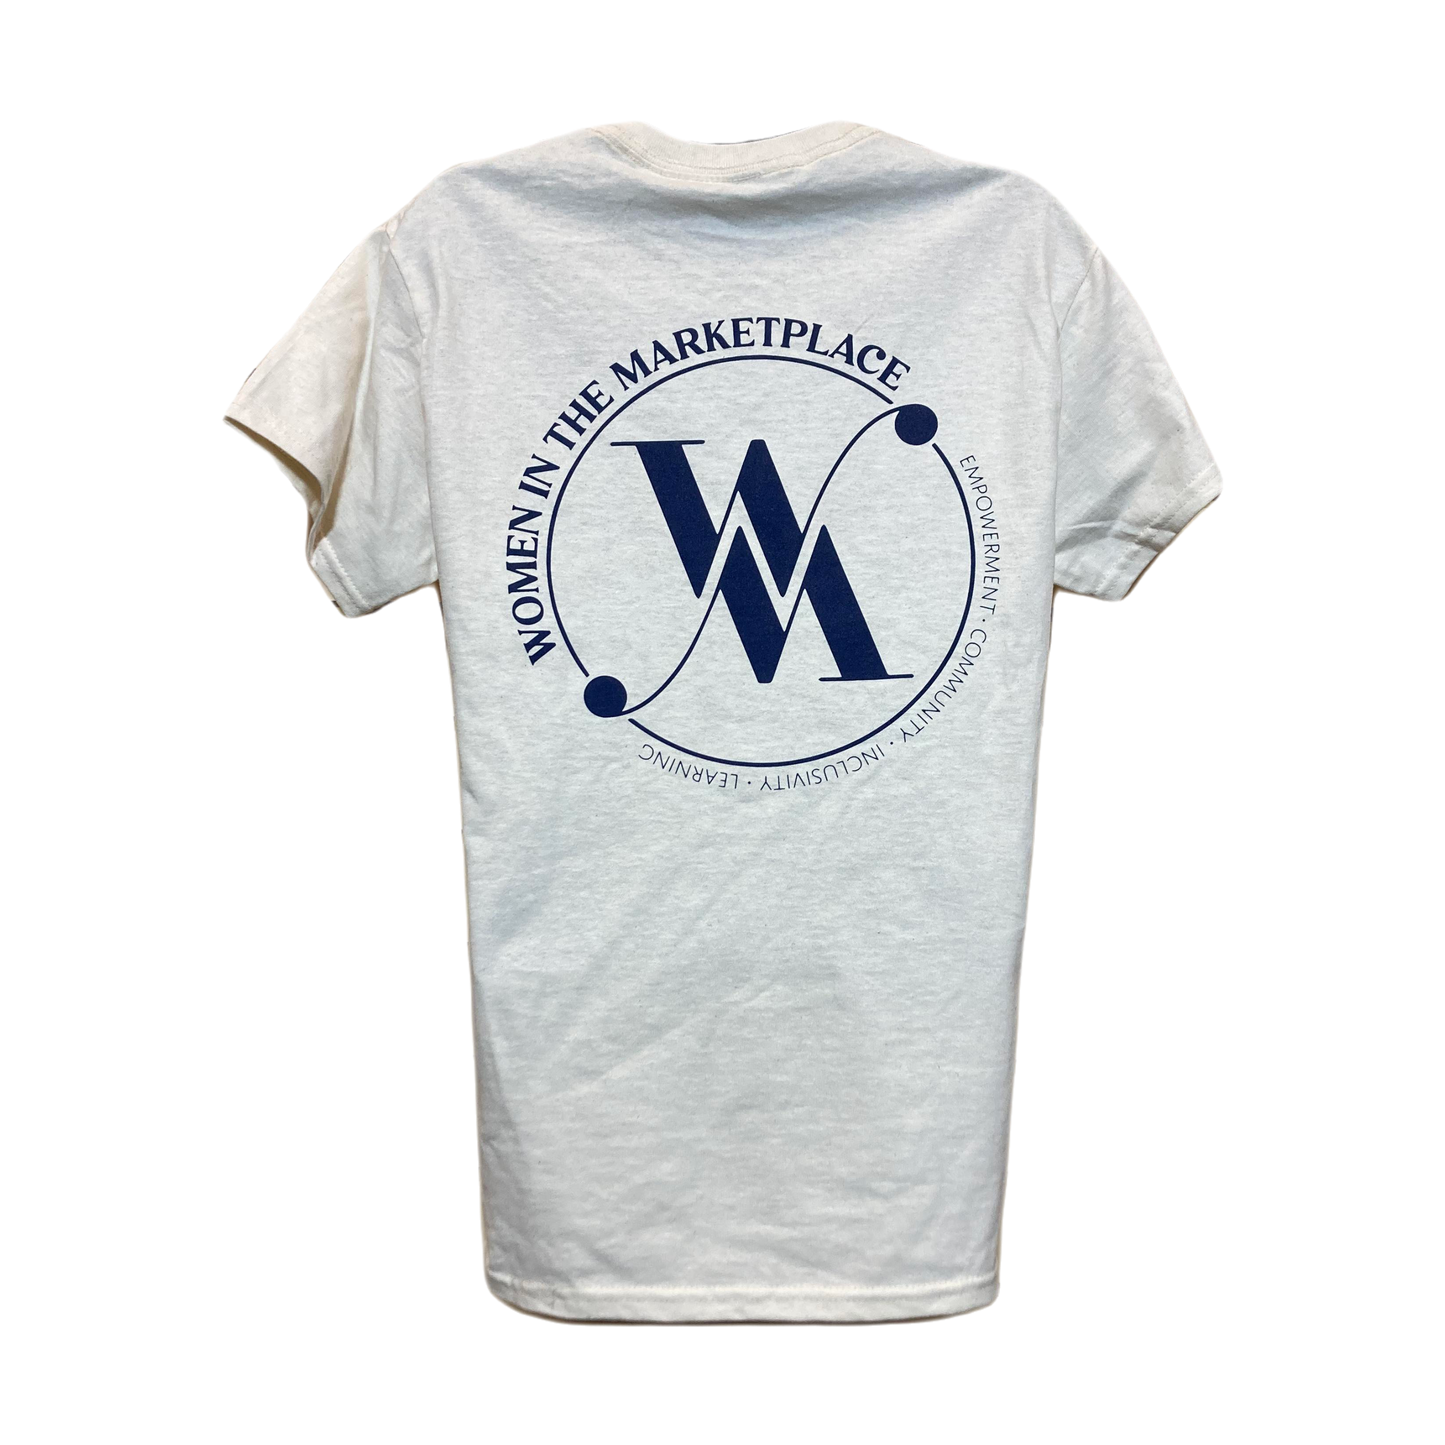 Women in the Marketplace T-Shirt